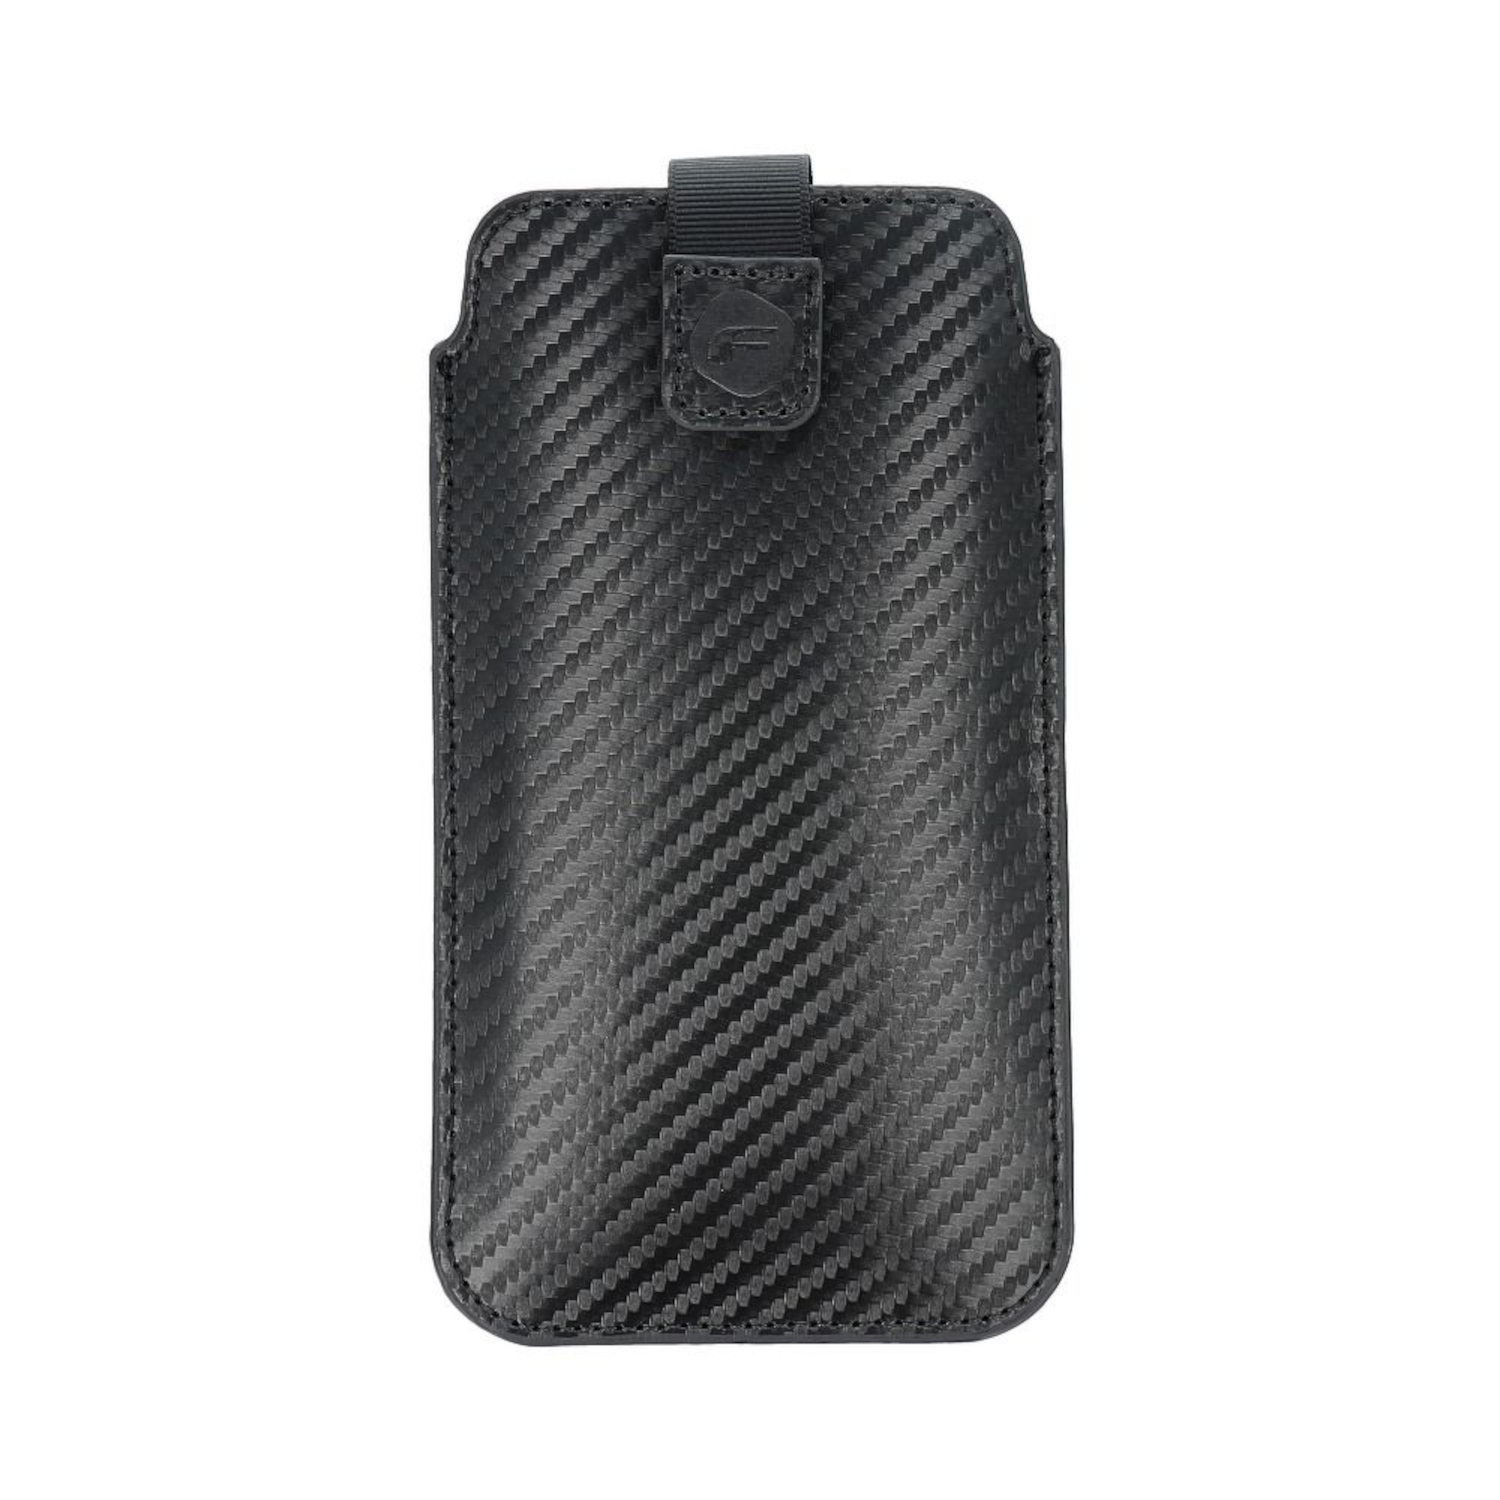 JAMCOVER Uni Carbon Holster, 10S,, Note 5G, Samsung, Galaxy Max, 12 Redmi Redmi A52s iPhone look Galaxy A52, 13 Galaxy Max, 10, A52 5G, iPhone Pro #12, Xiaomi, Apple, Note Schwarz A71, Pro